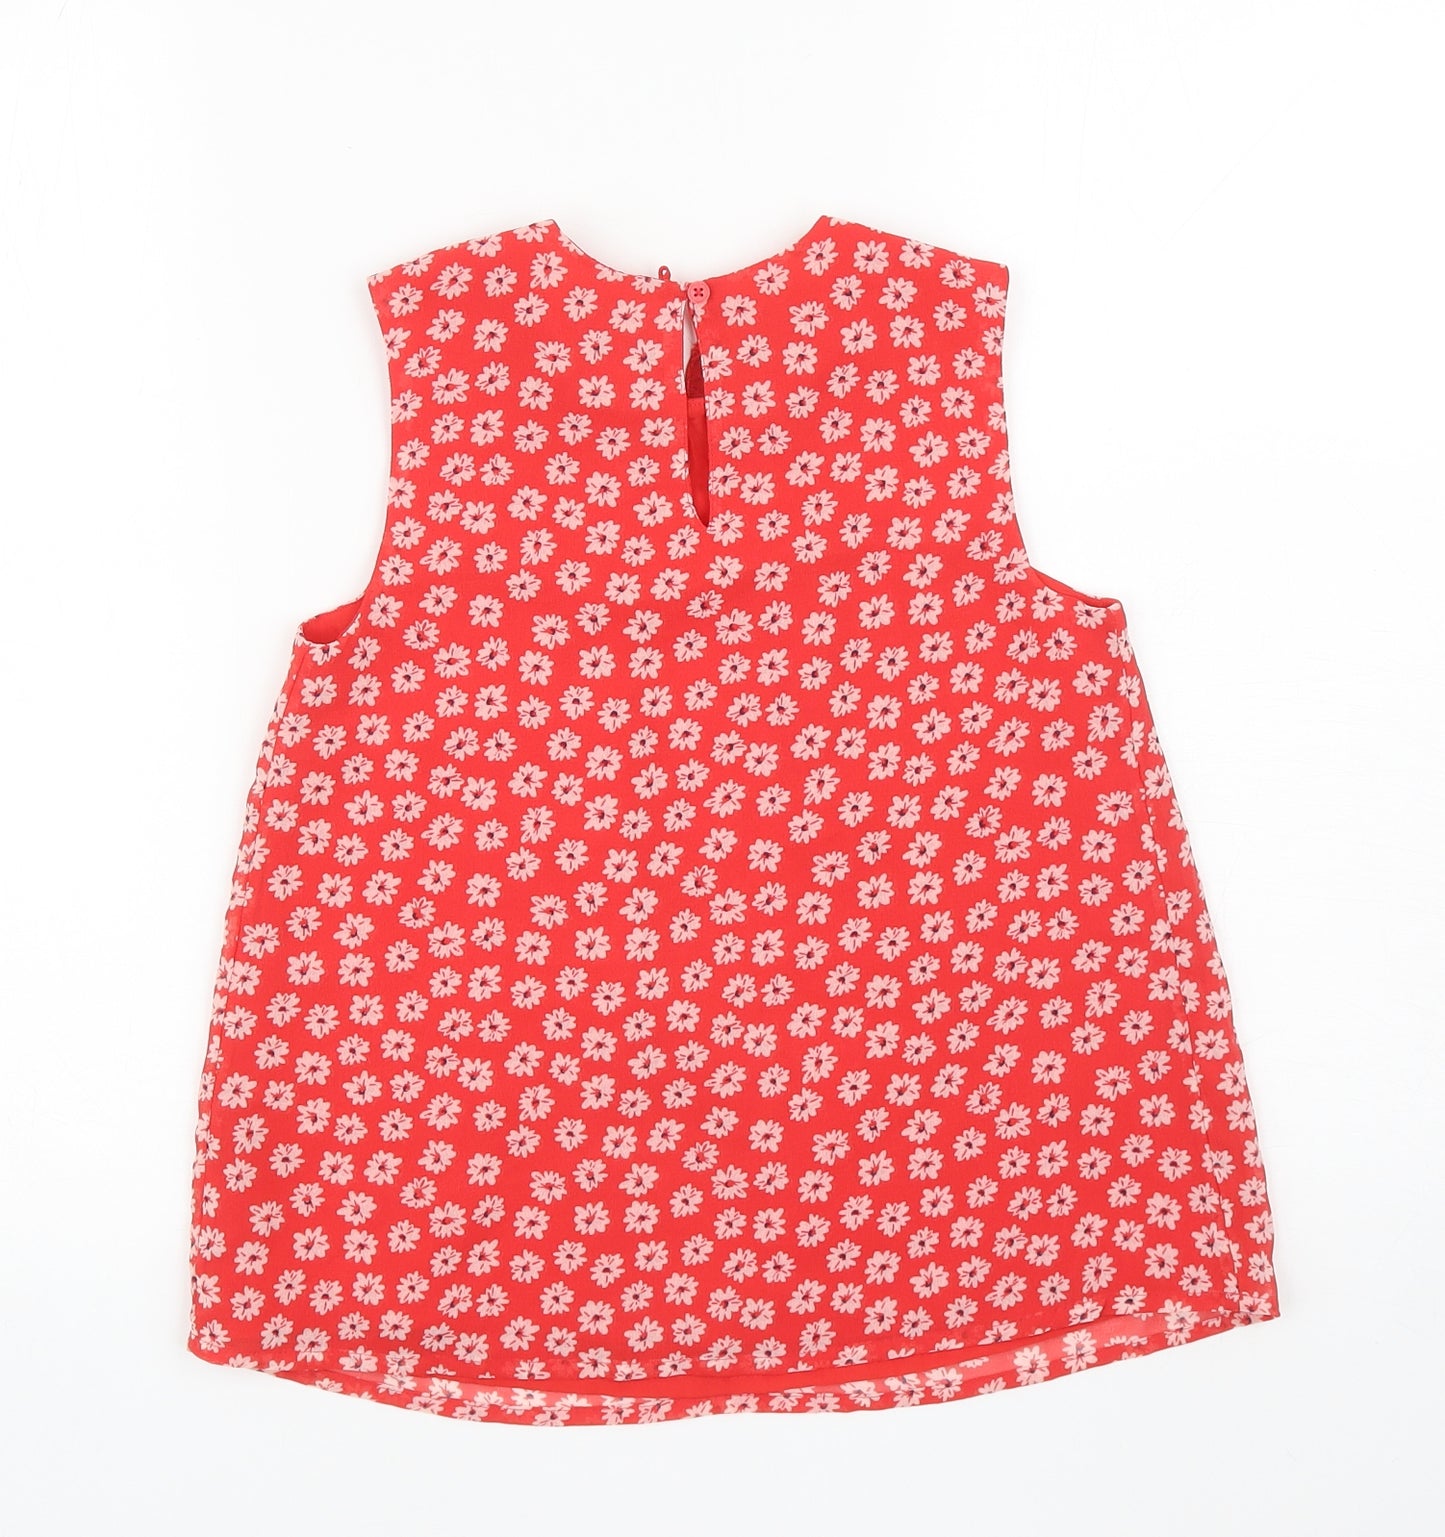 George Girls Red Floral Polyester Tank Dress Size 9-10 Years Scoop Neck Button - Embellished Neckline